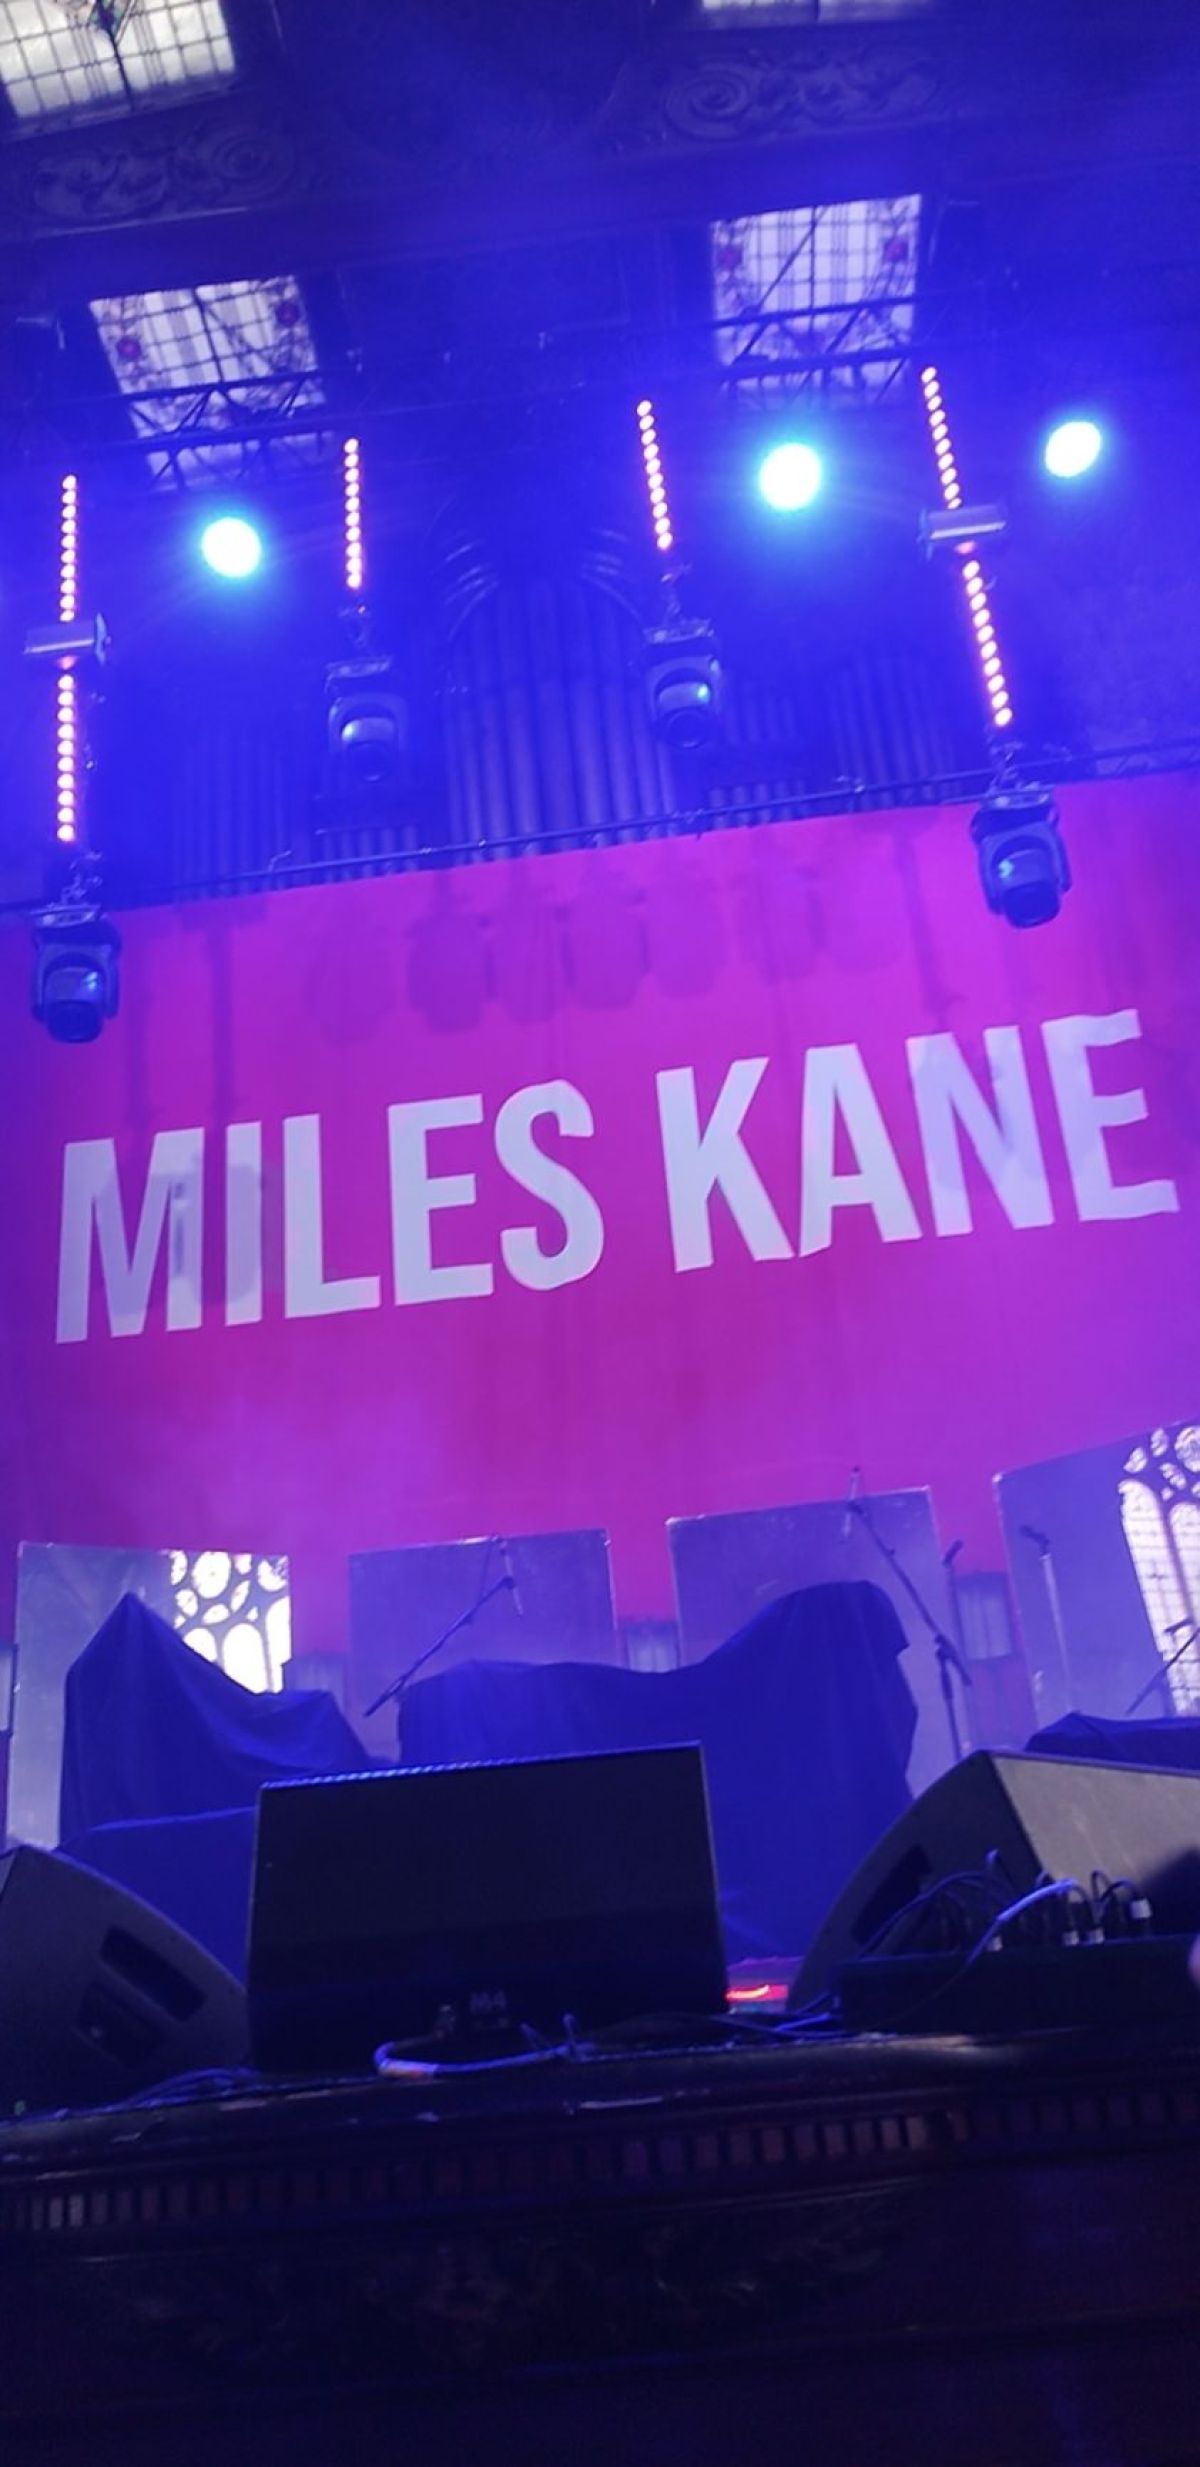 Live Review: Miles Kane at The Albert Hall